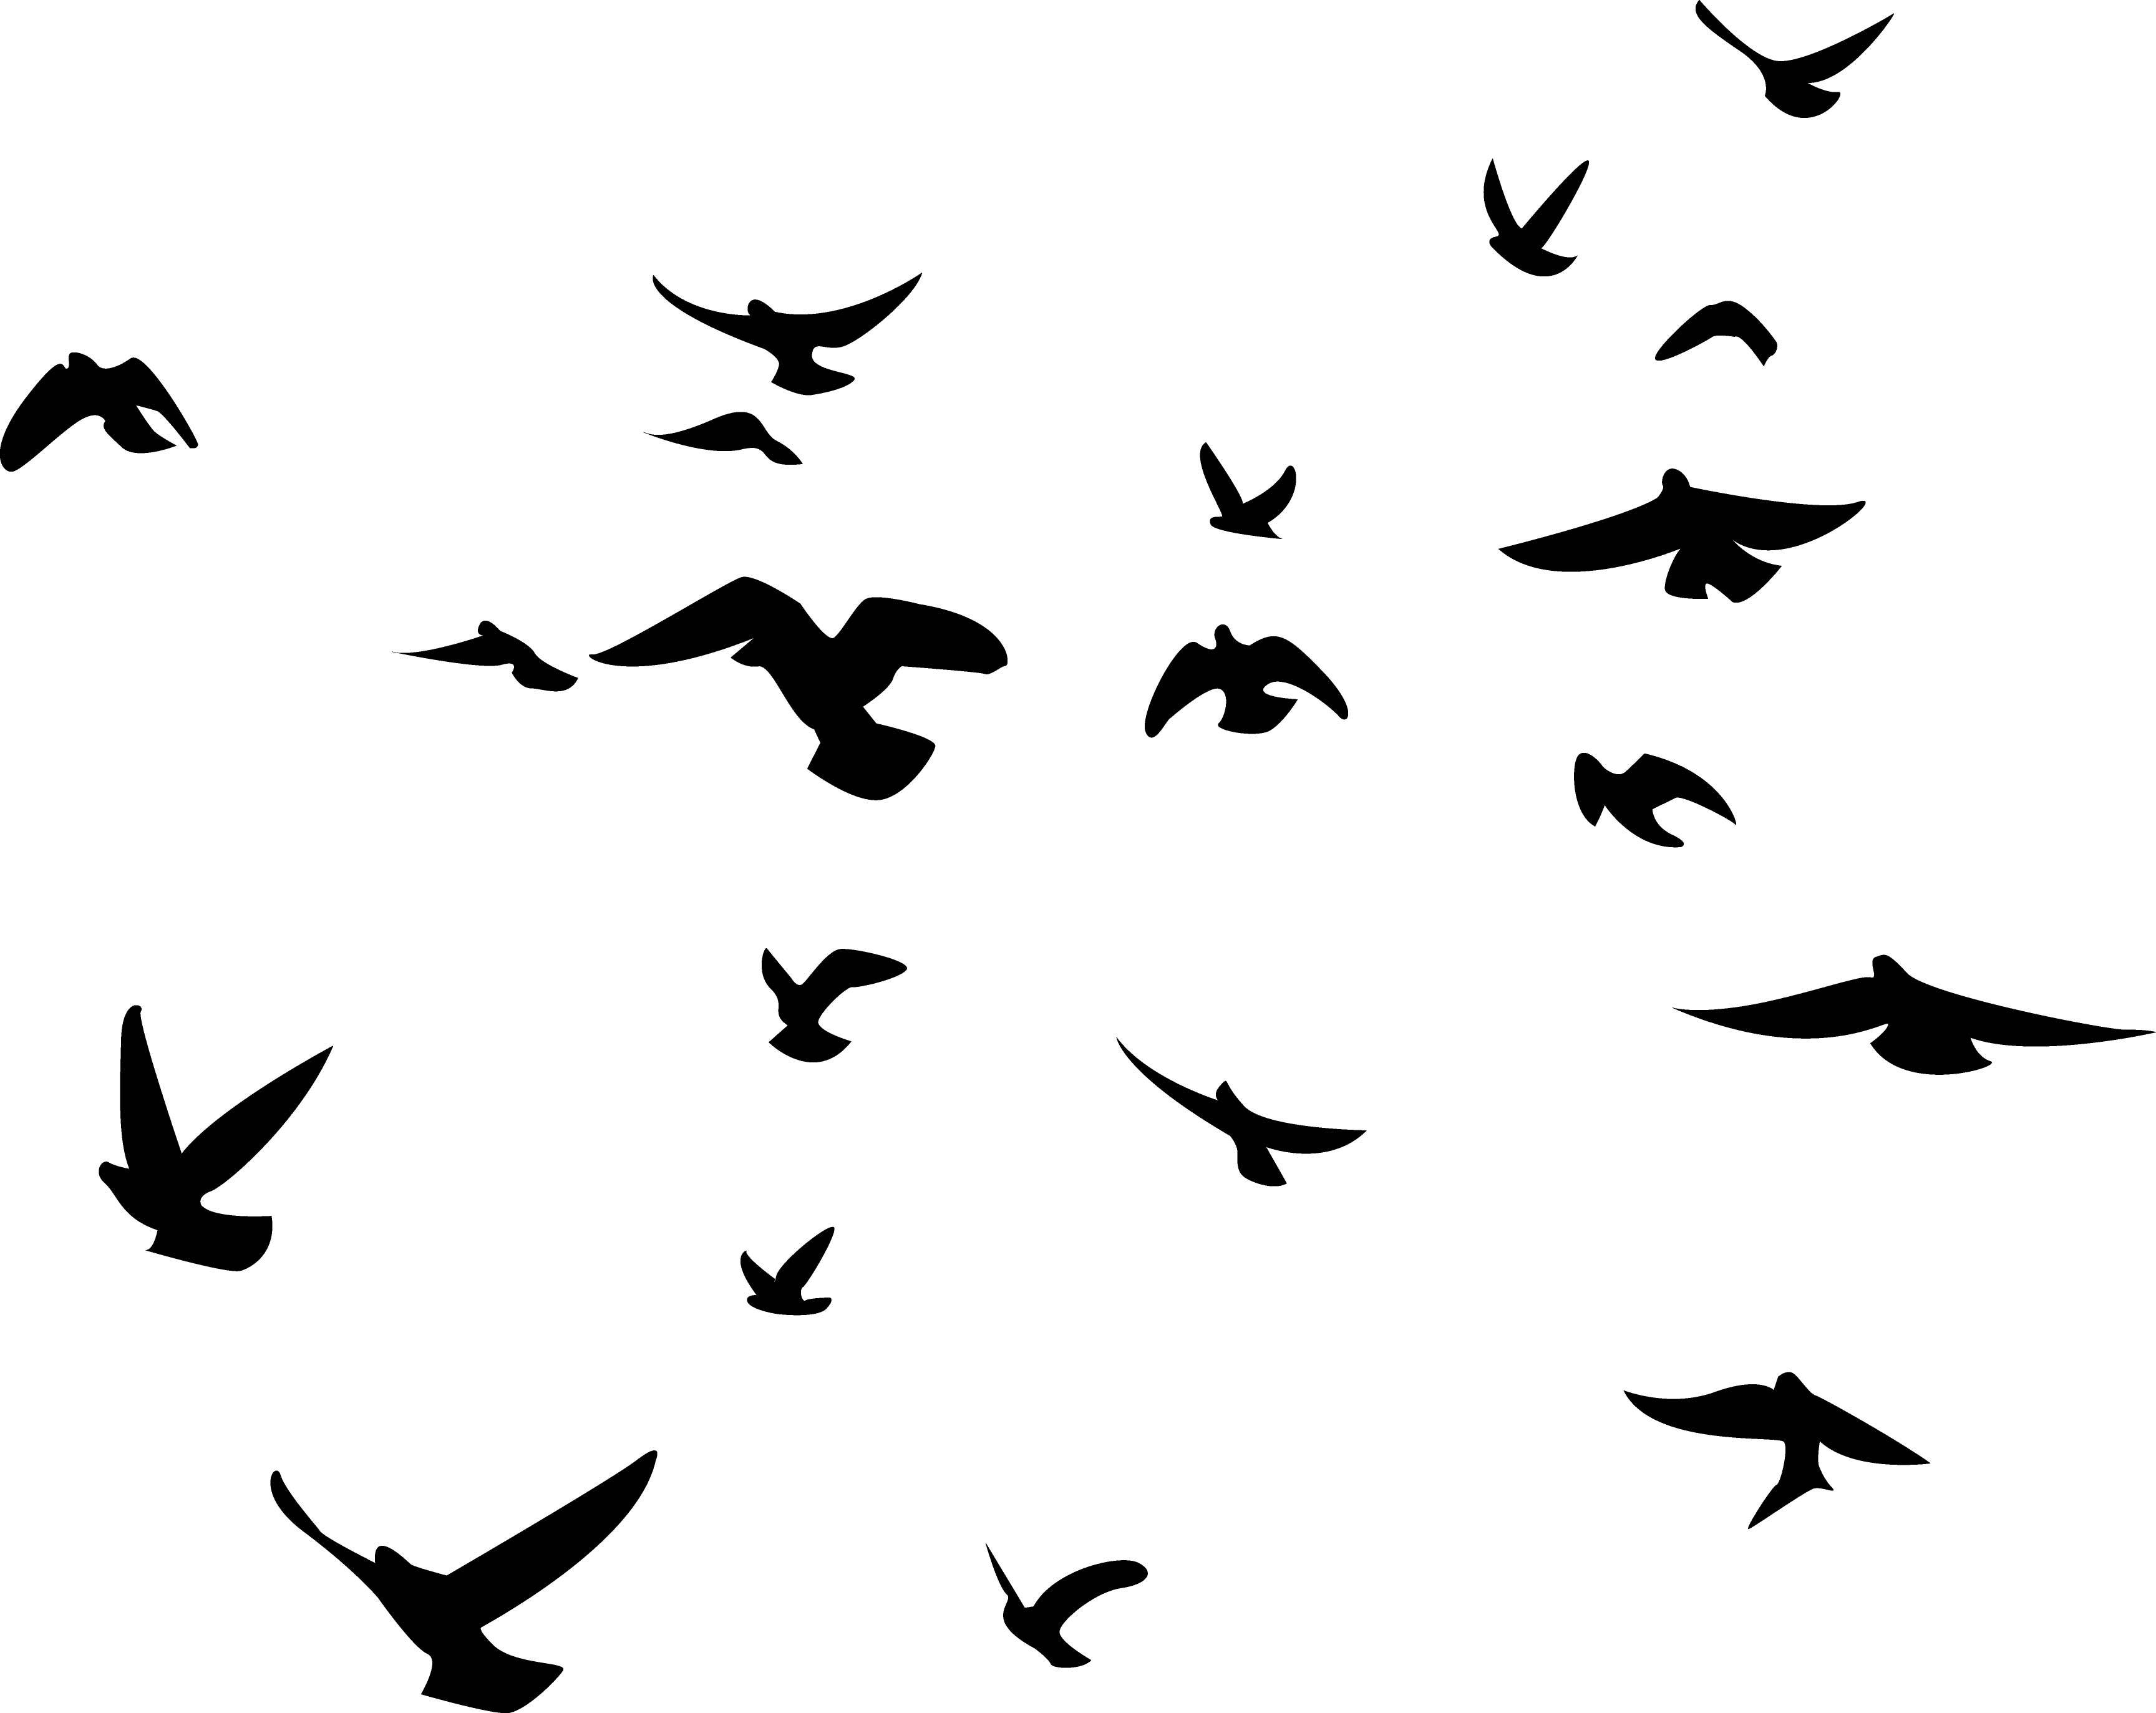 Soaring Birds Silhouette Wall Decal Set